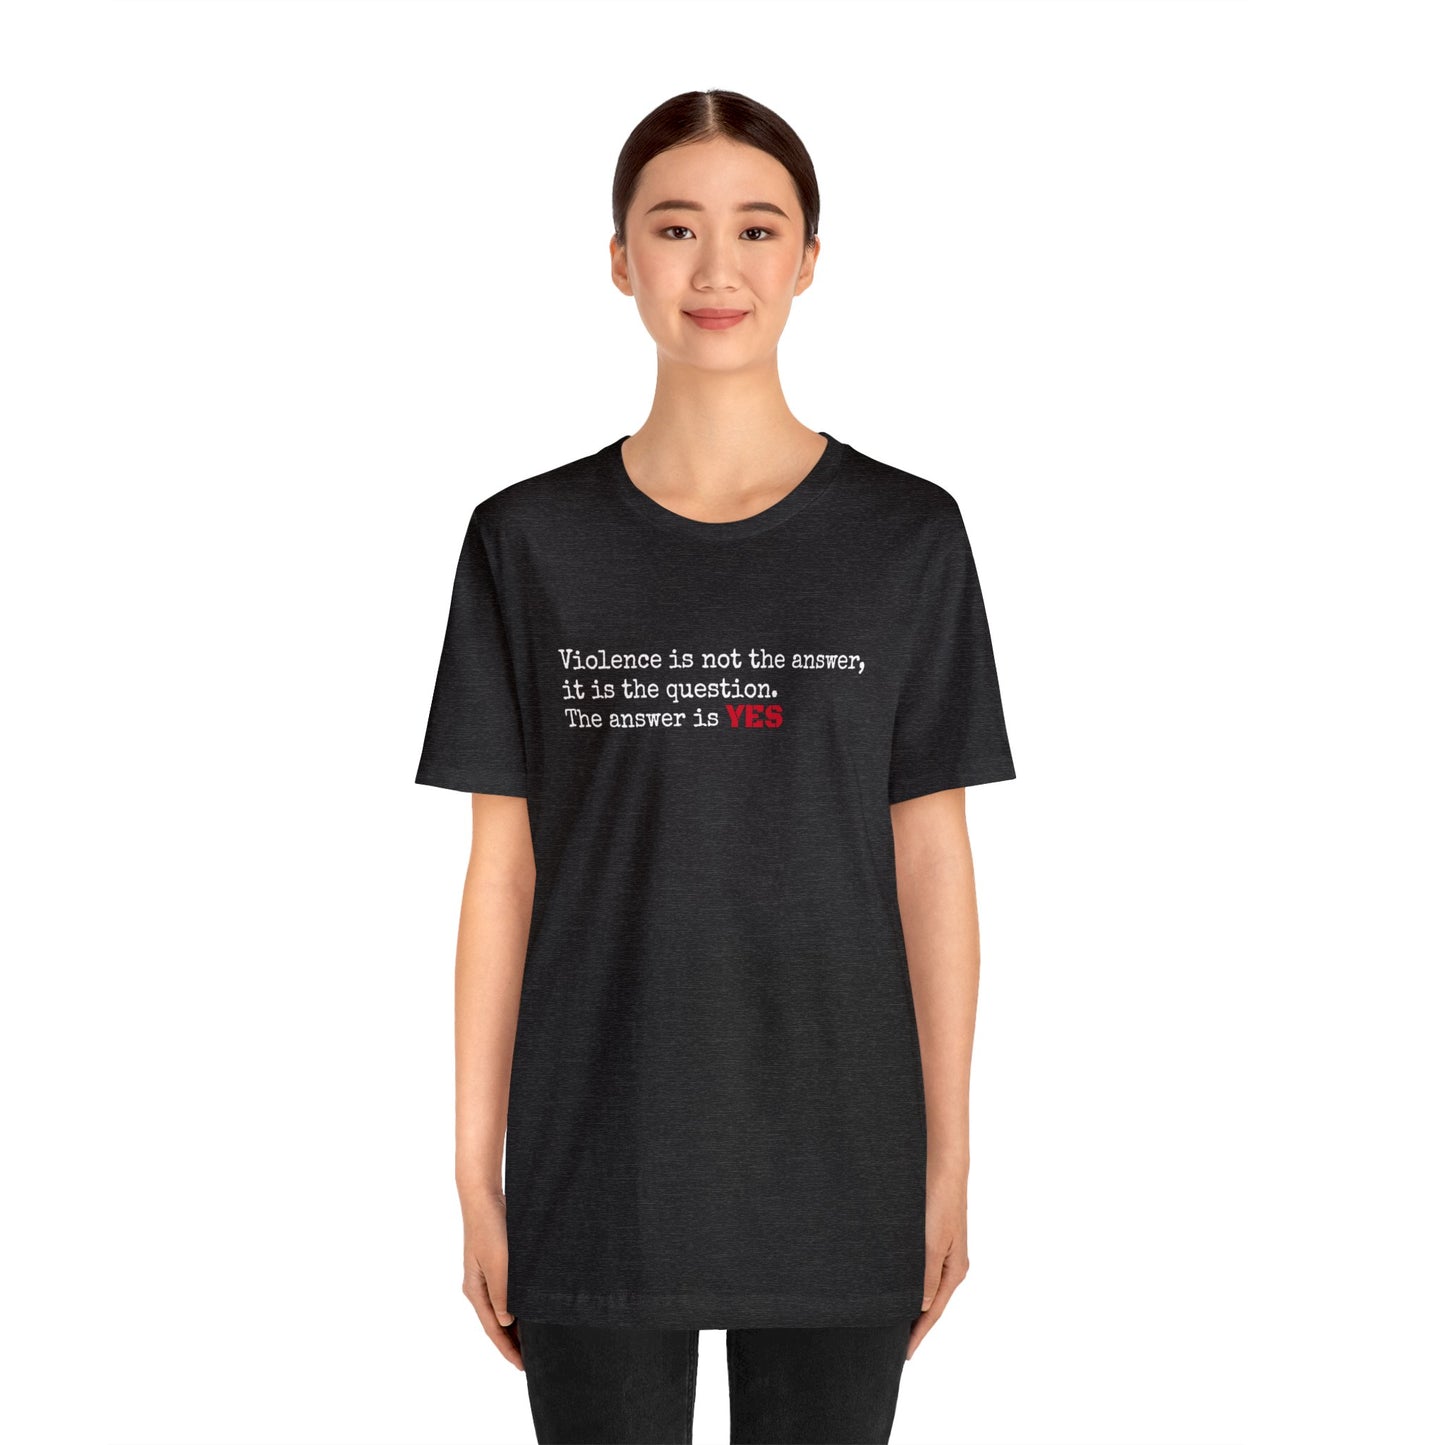 Violence is not the answer shirt.